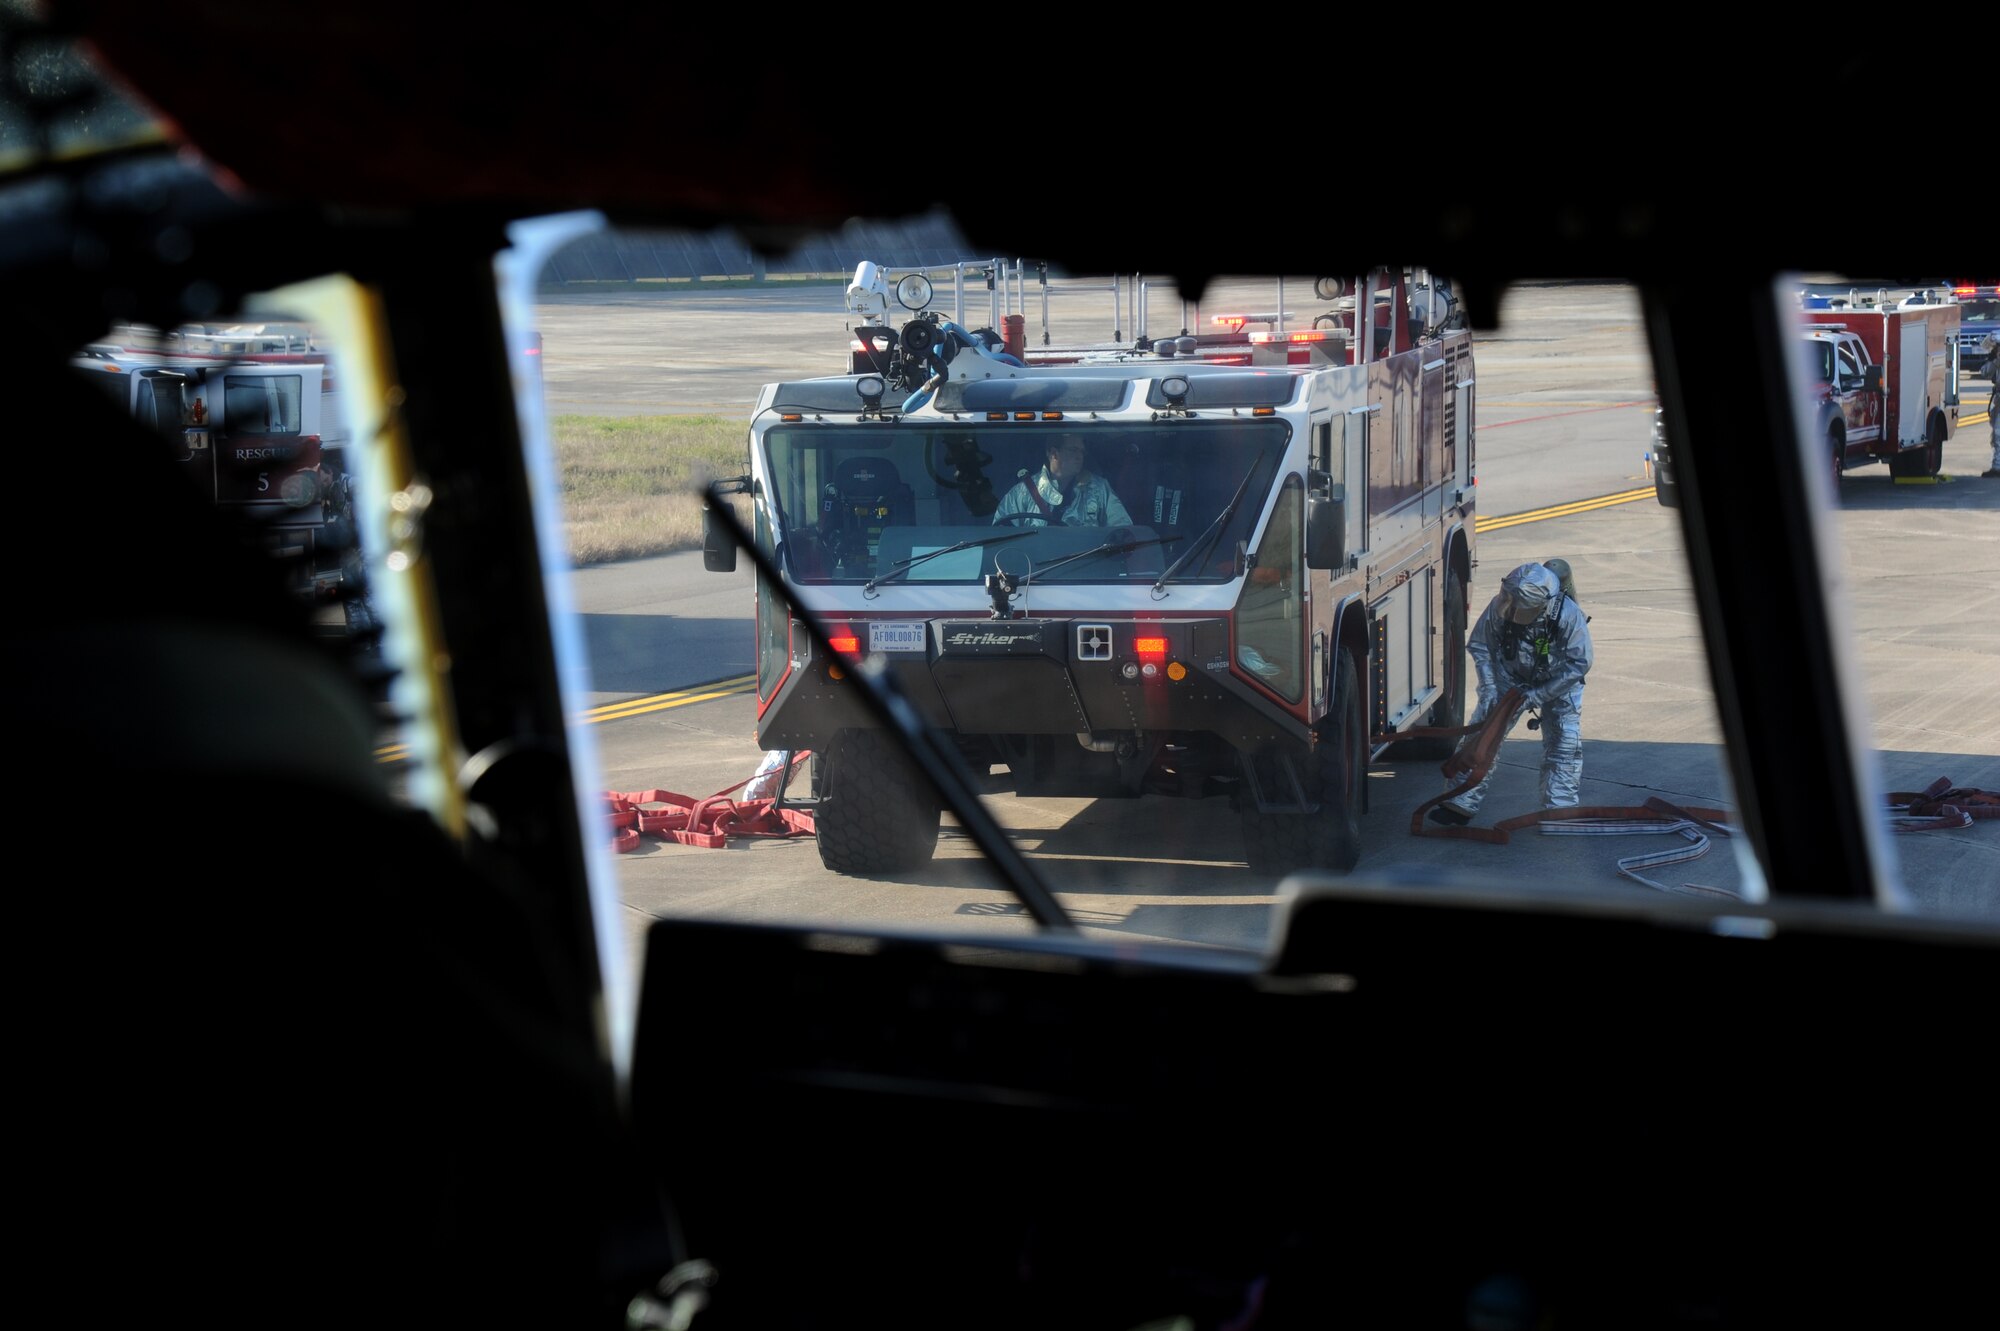 Keesler firefighters respond during a major accident response exercise Feb. 12, 2015, on the flight line, Keesler Air Force Base, Miss.  The MARE simulated a C-130J Hercules aircraft crash on base. Exercises are held periodically to prepare for real world emergencies.  (U.S. Air Force photo by Kemberly Groue)